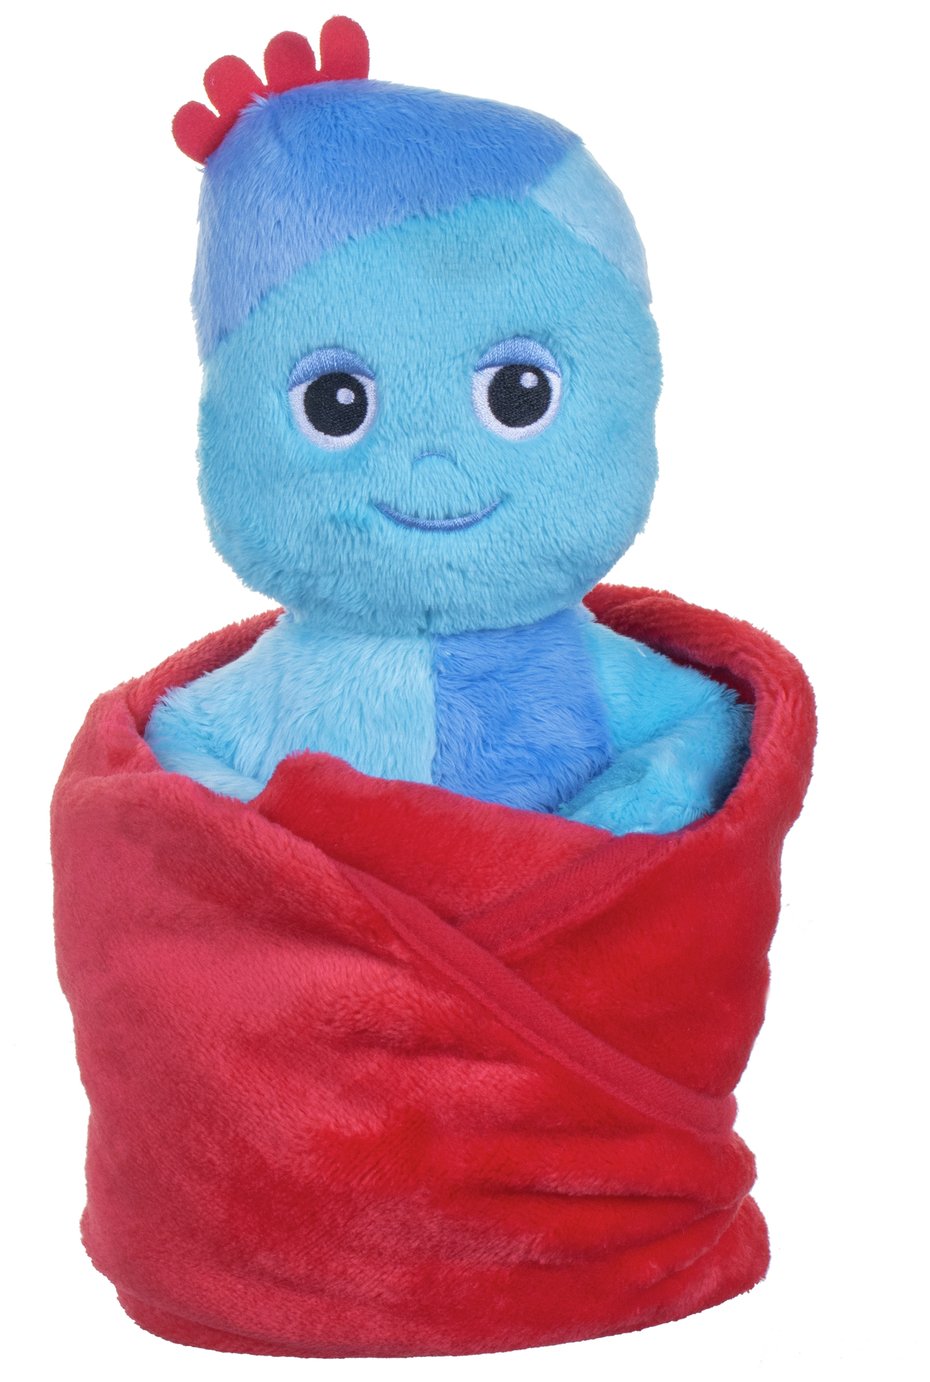 In The Night Garden Igglepiggle Super Soft Blankie Bundle review